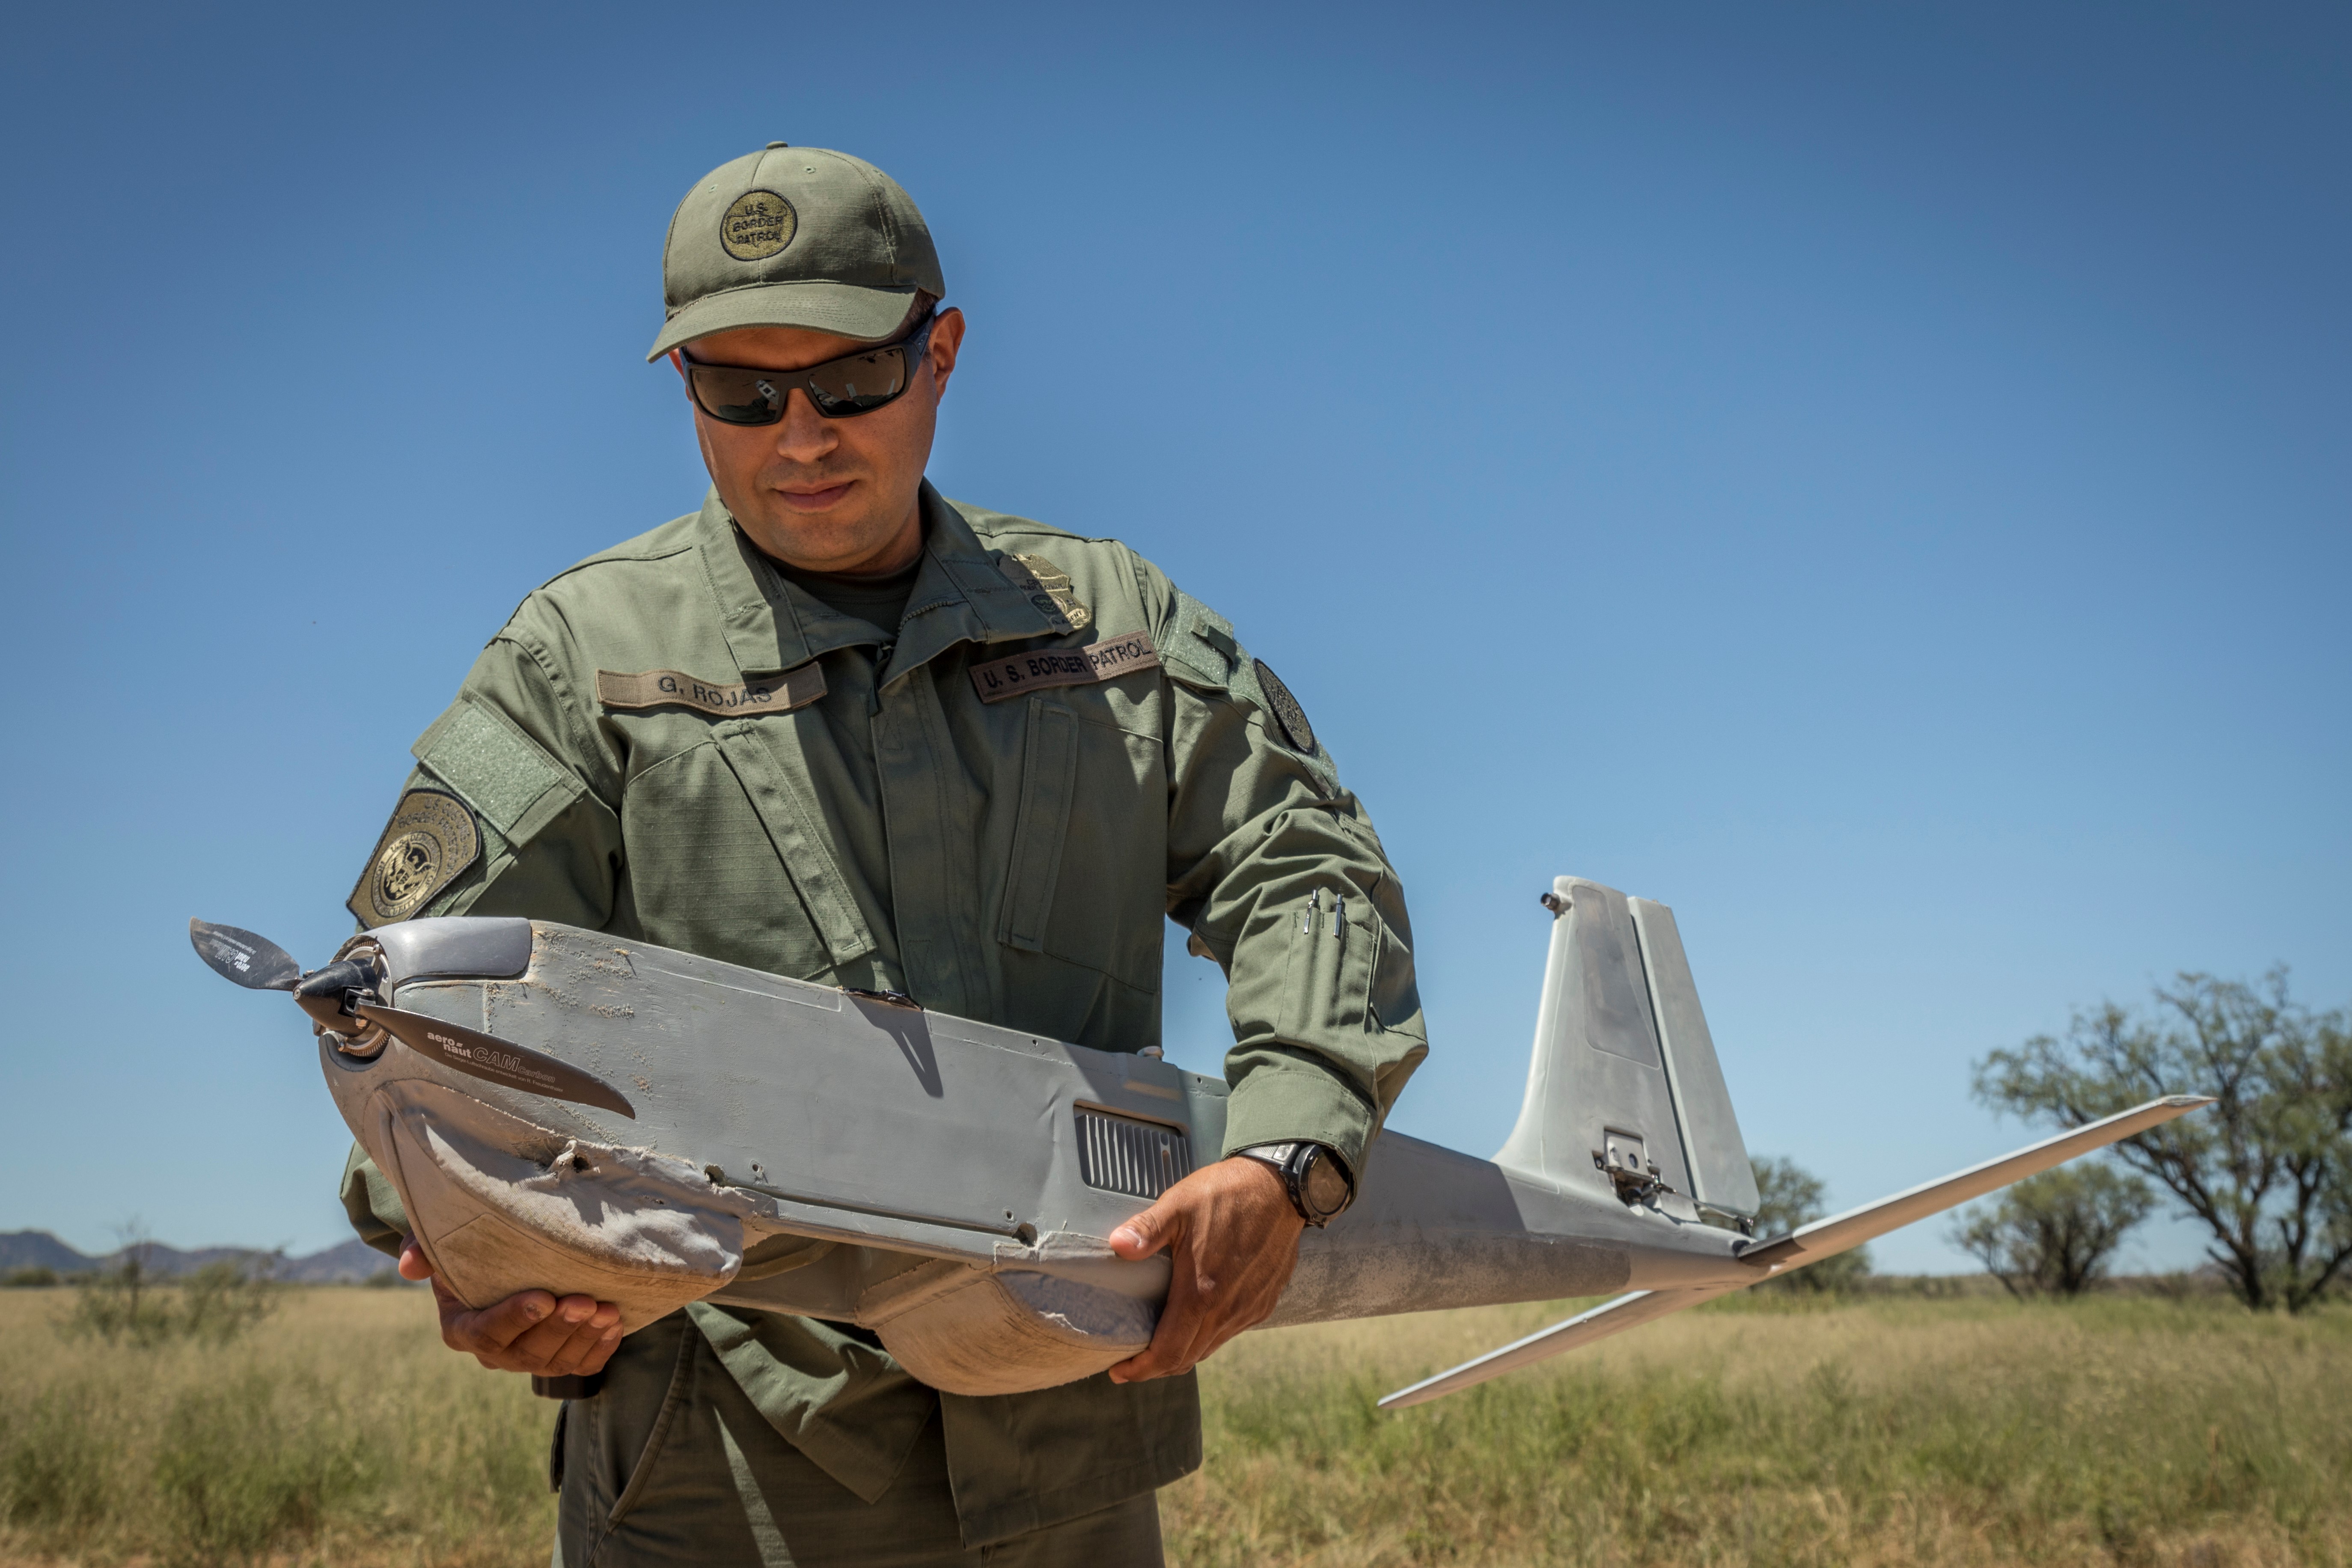 Taking to the Air Small, unmanned aircraft extend Border Patrol's reach